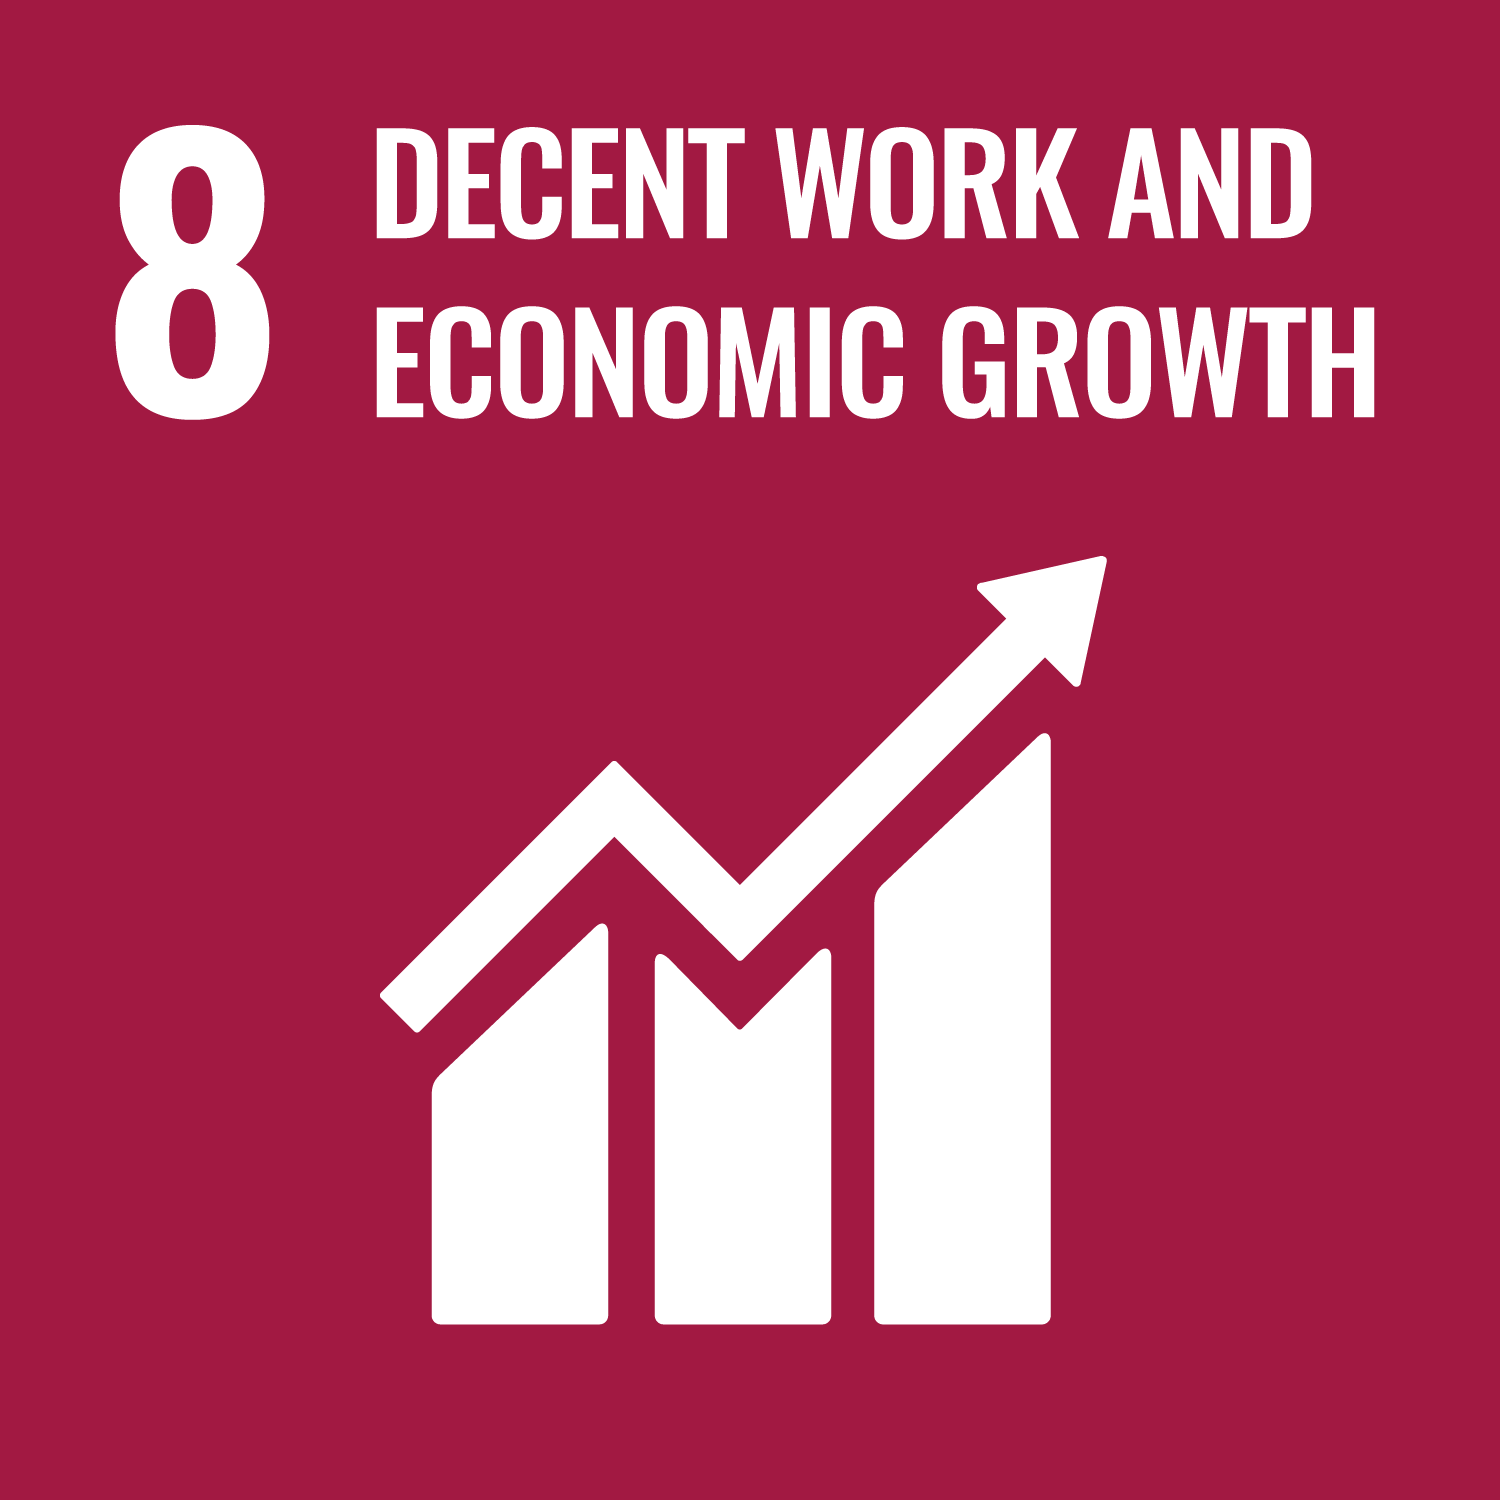 United Nations Sustainable Development Goal Number 8: Decent Work and Economic Growth